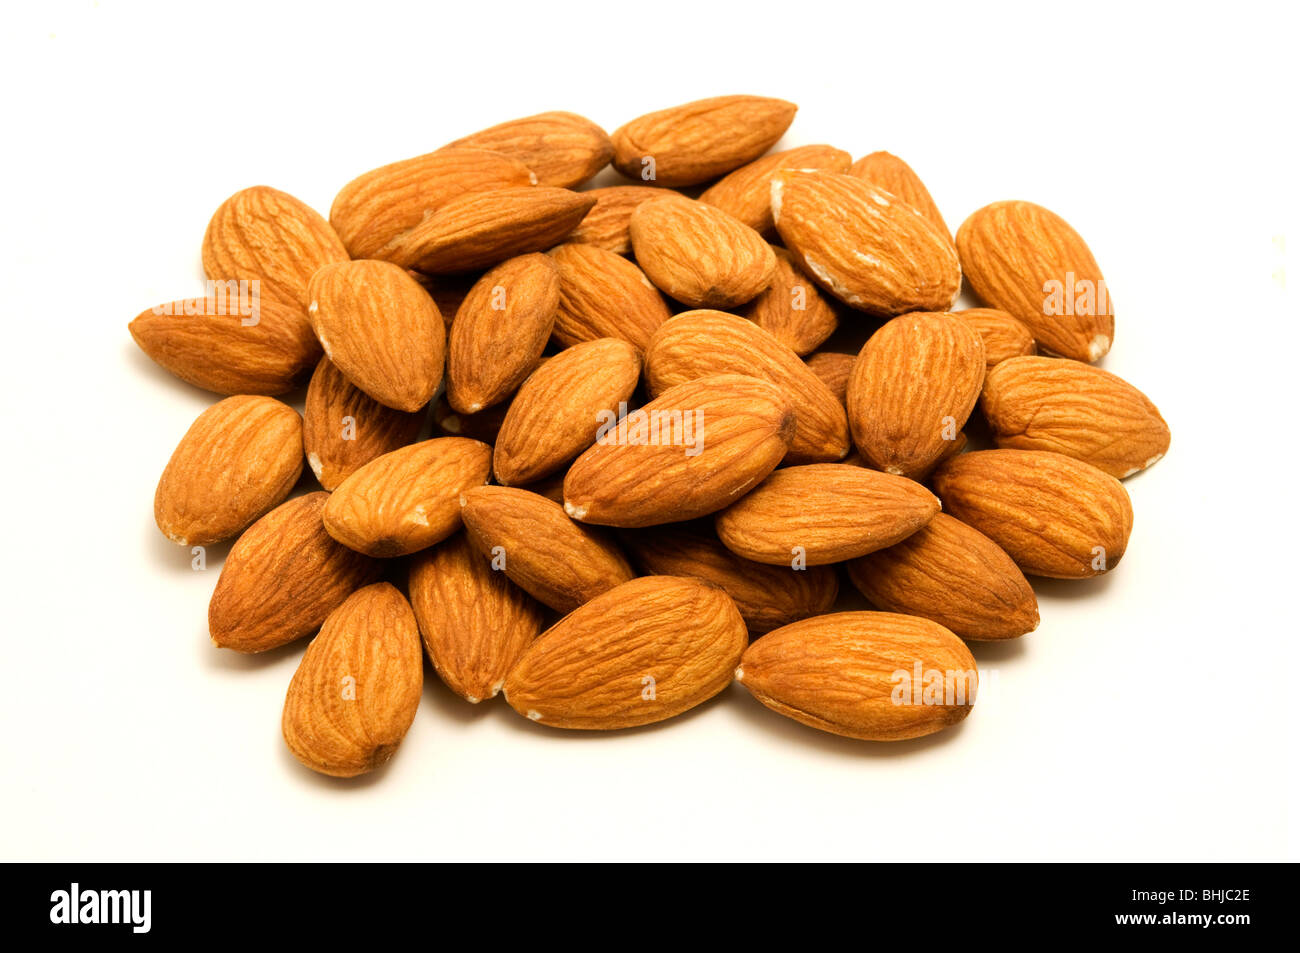 Unshelled almonds on a white background Stock Photo